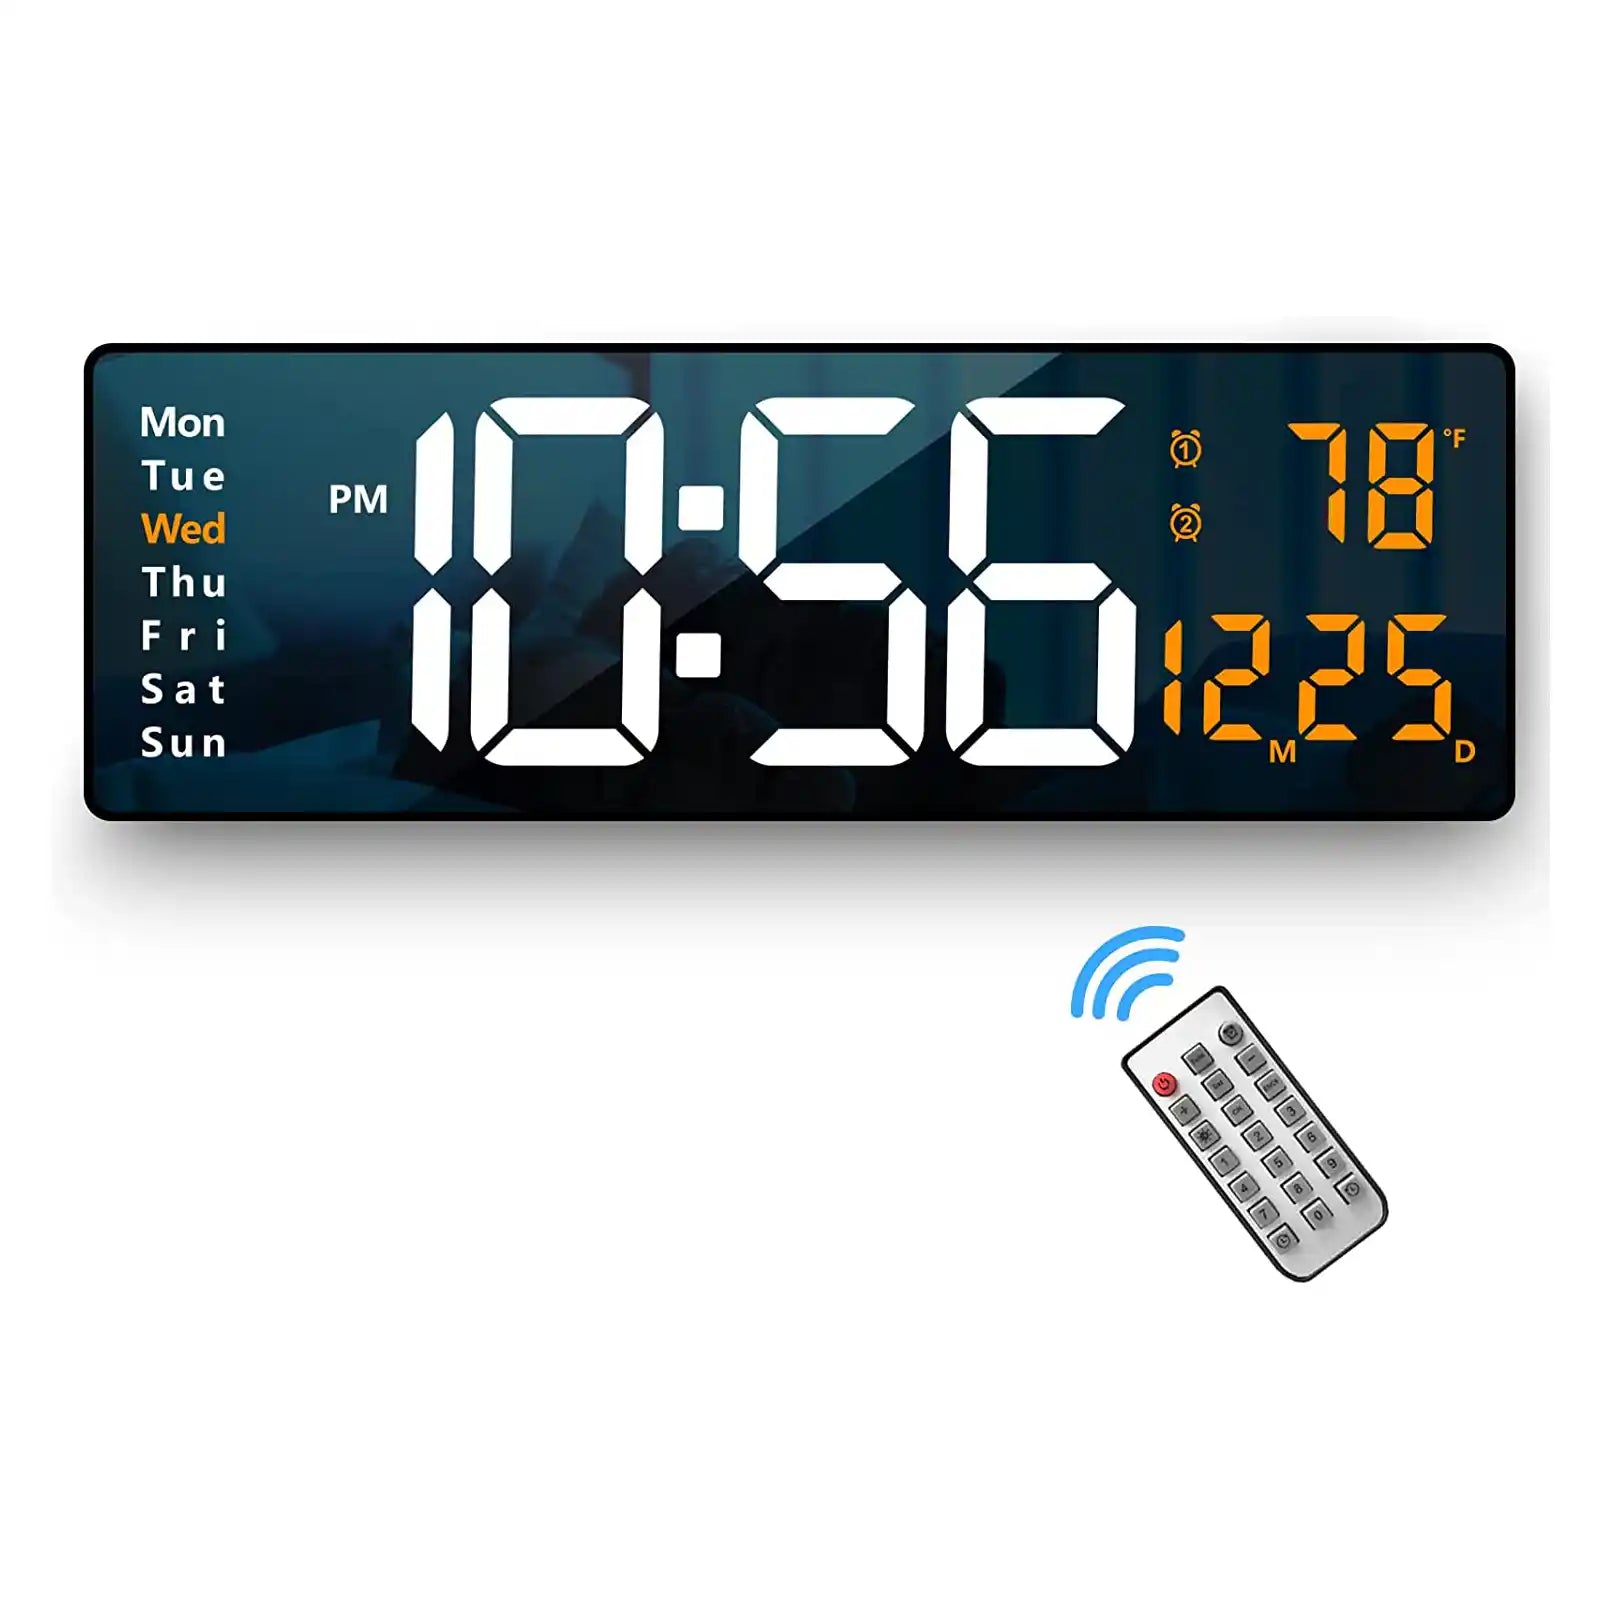 Digital Wall Clock Large Display, 16" Large Wall Clocks with Remote Control for Living Room Gym Shop Warehouse Office Garage Decor, Auto Brightness Dimmer Reloj De Pared with Date Week Temp